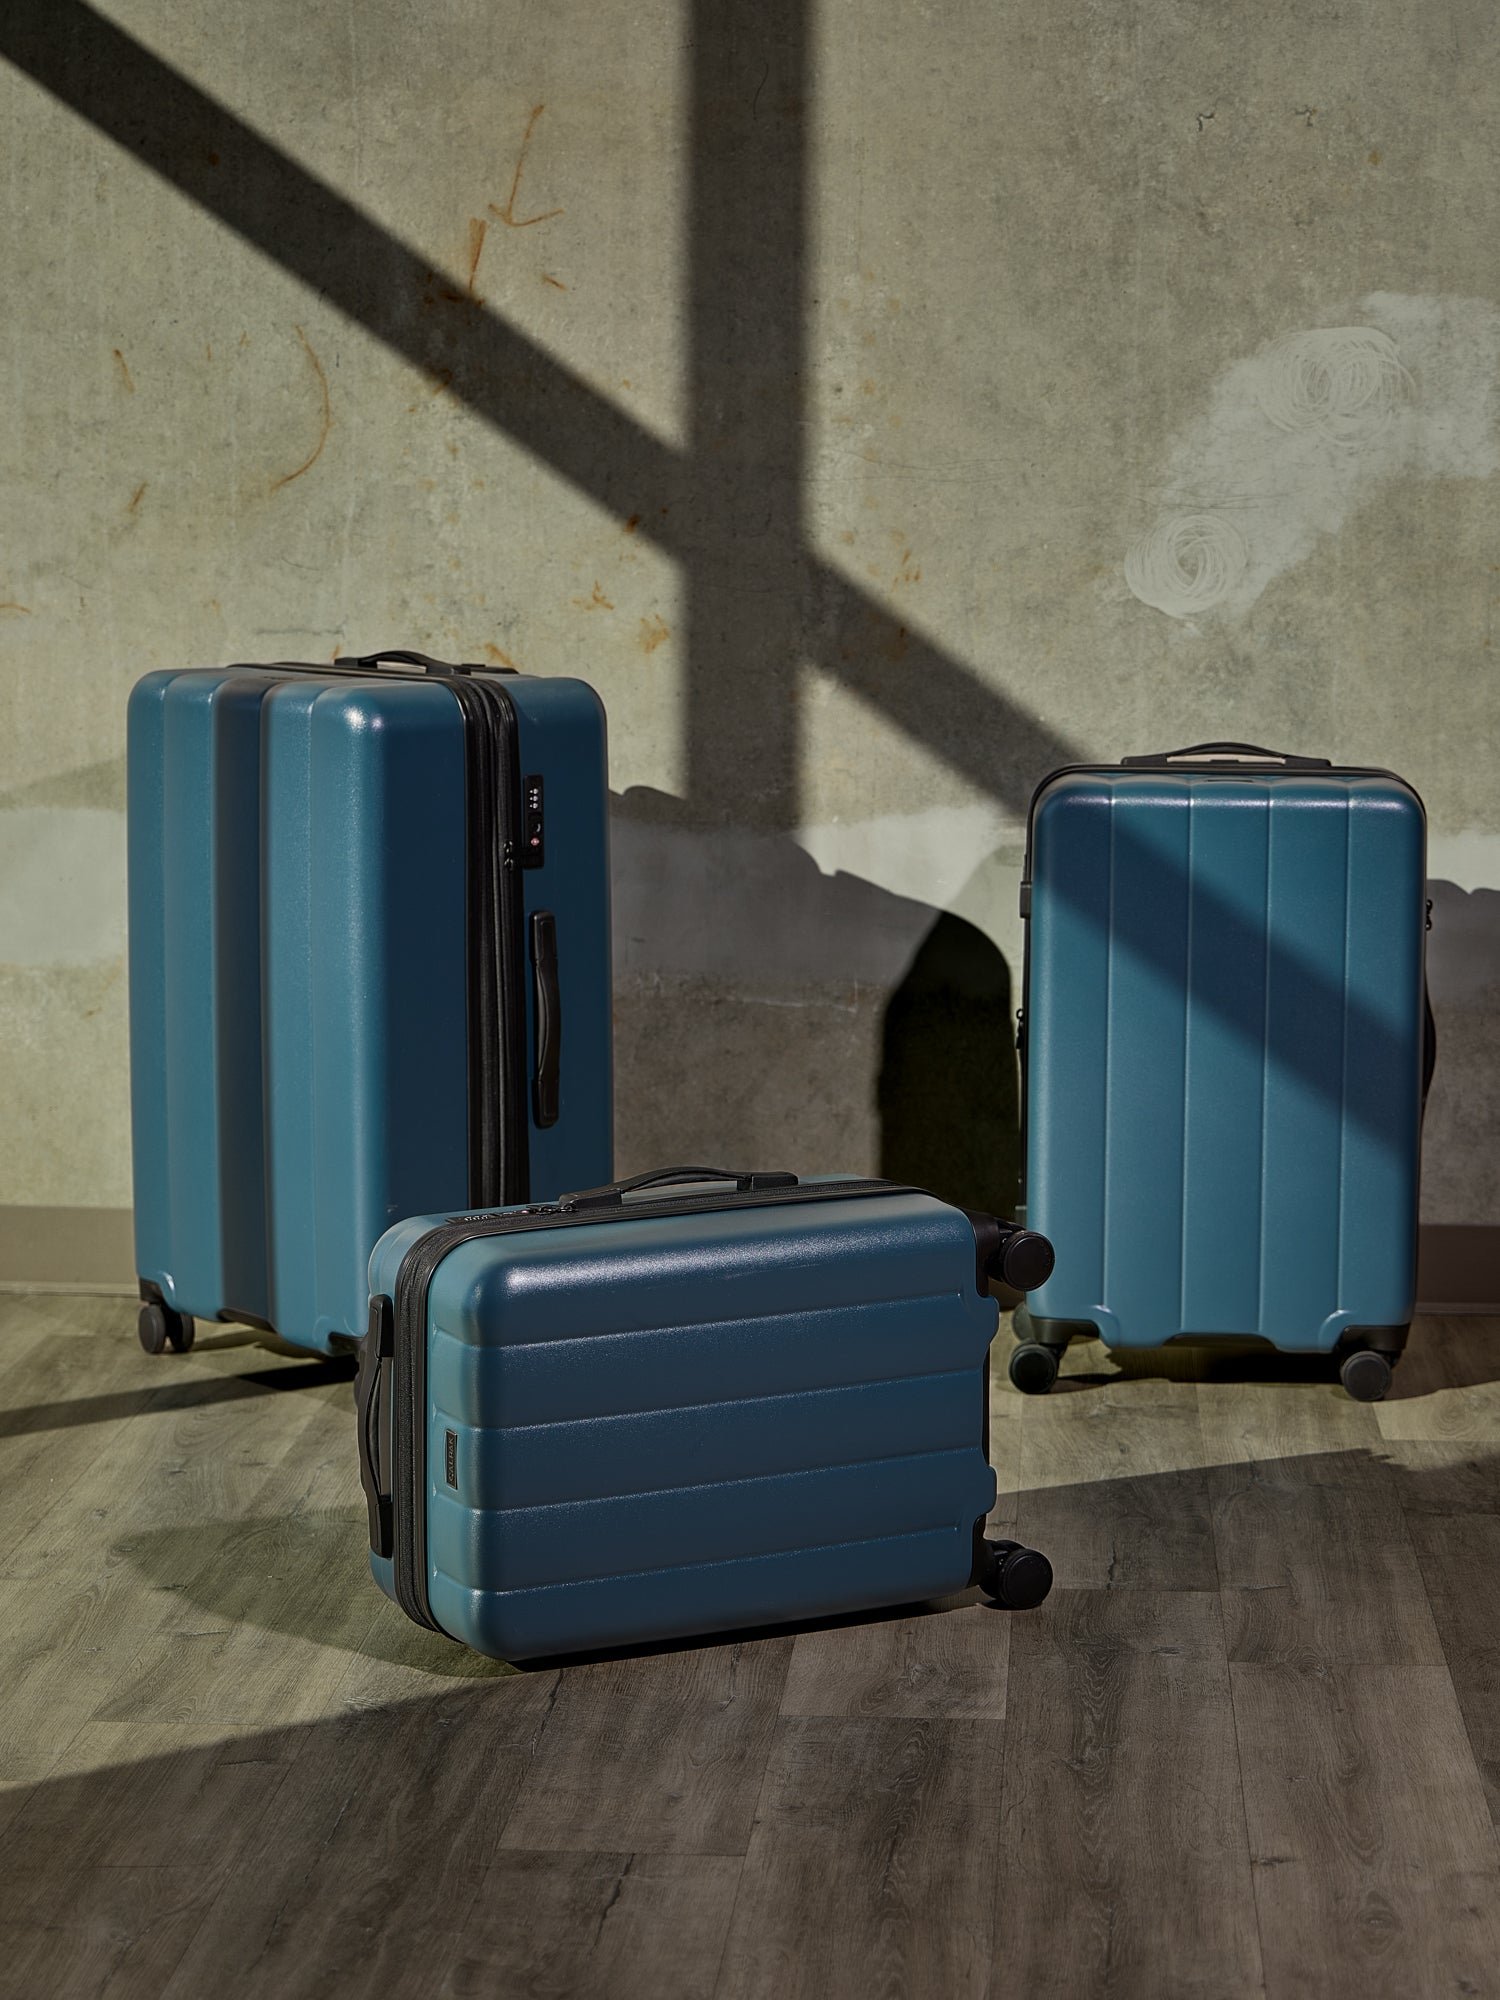 CALPAK Evry Carry-On Luggage, Evry Medium Luggage, and Evry Large Luggage in pacific blue